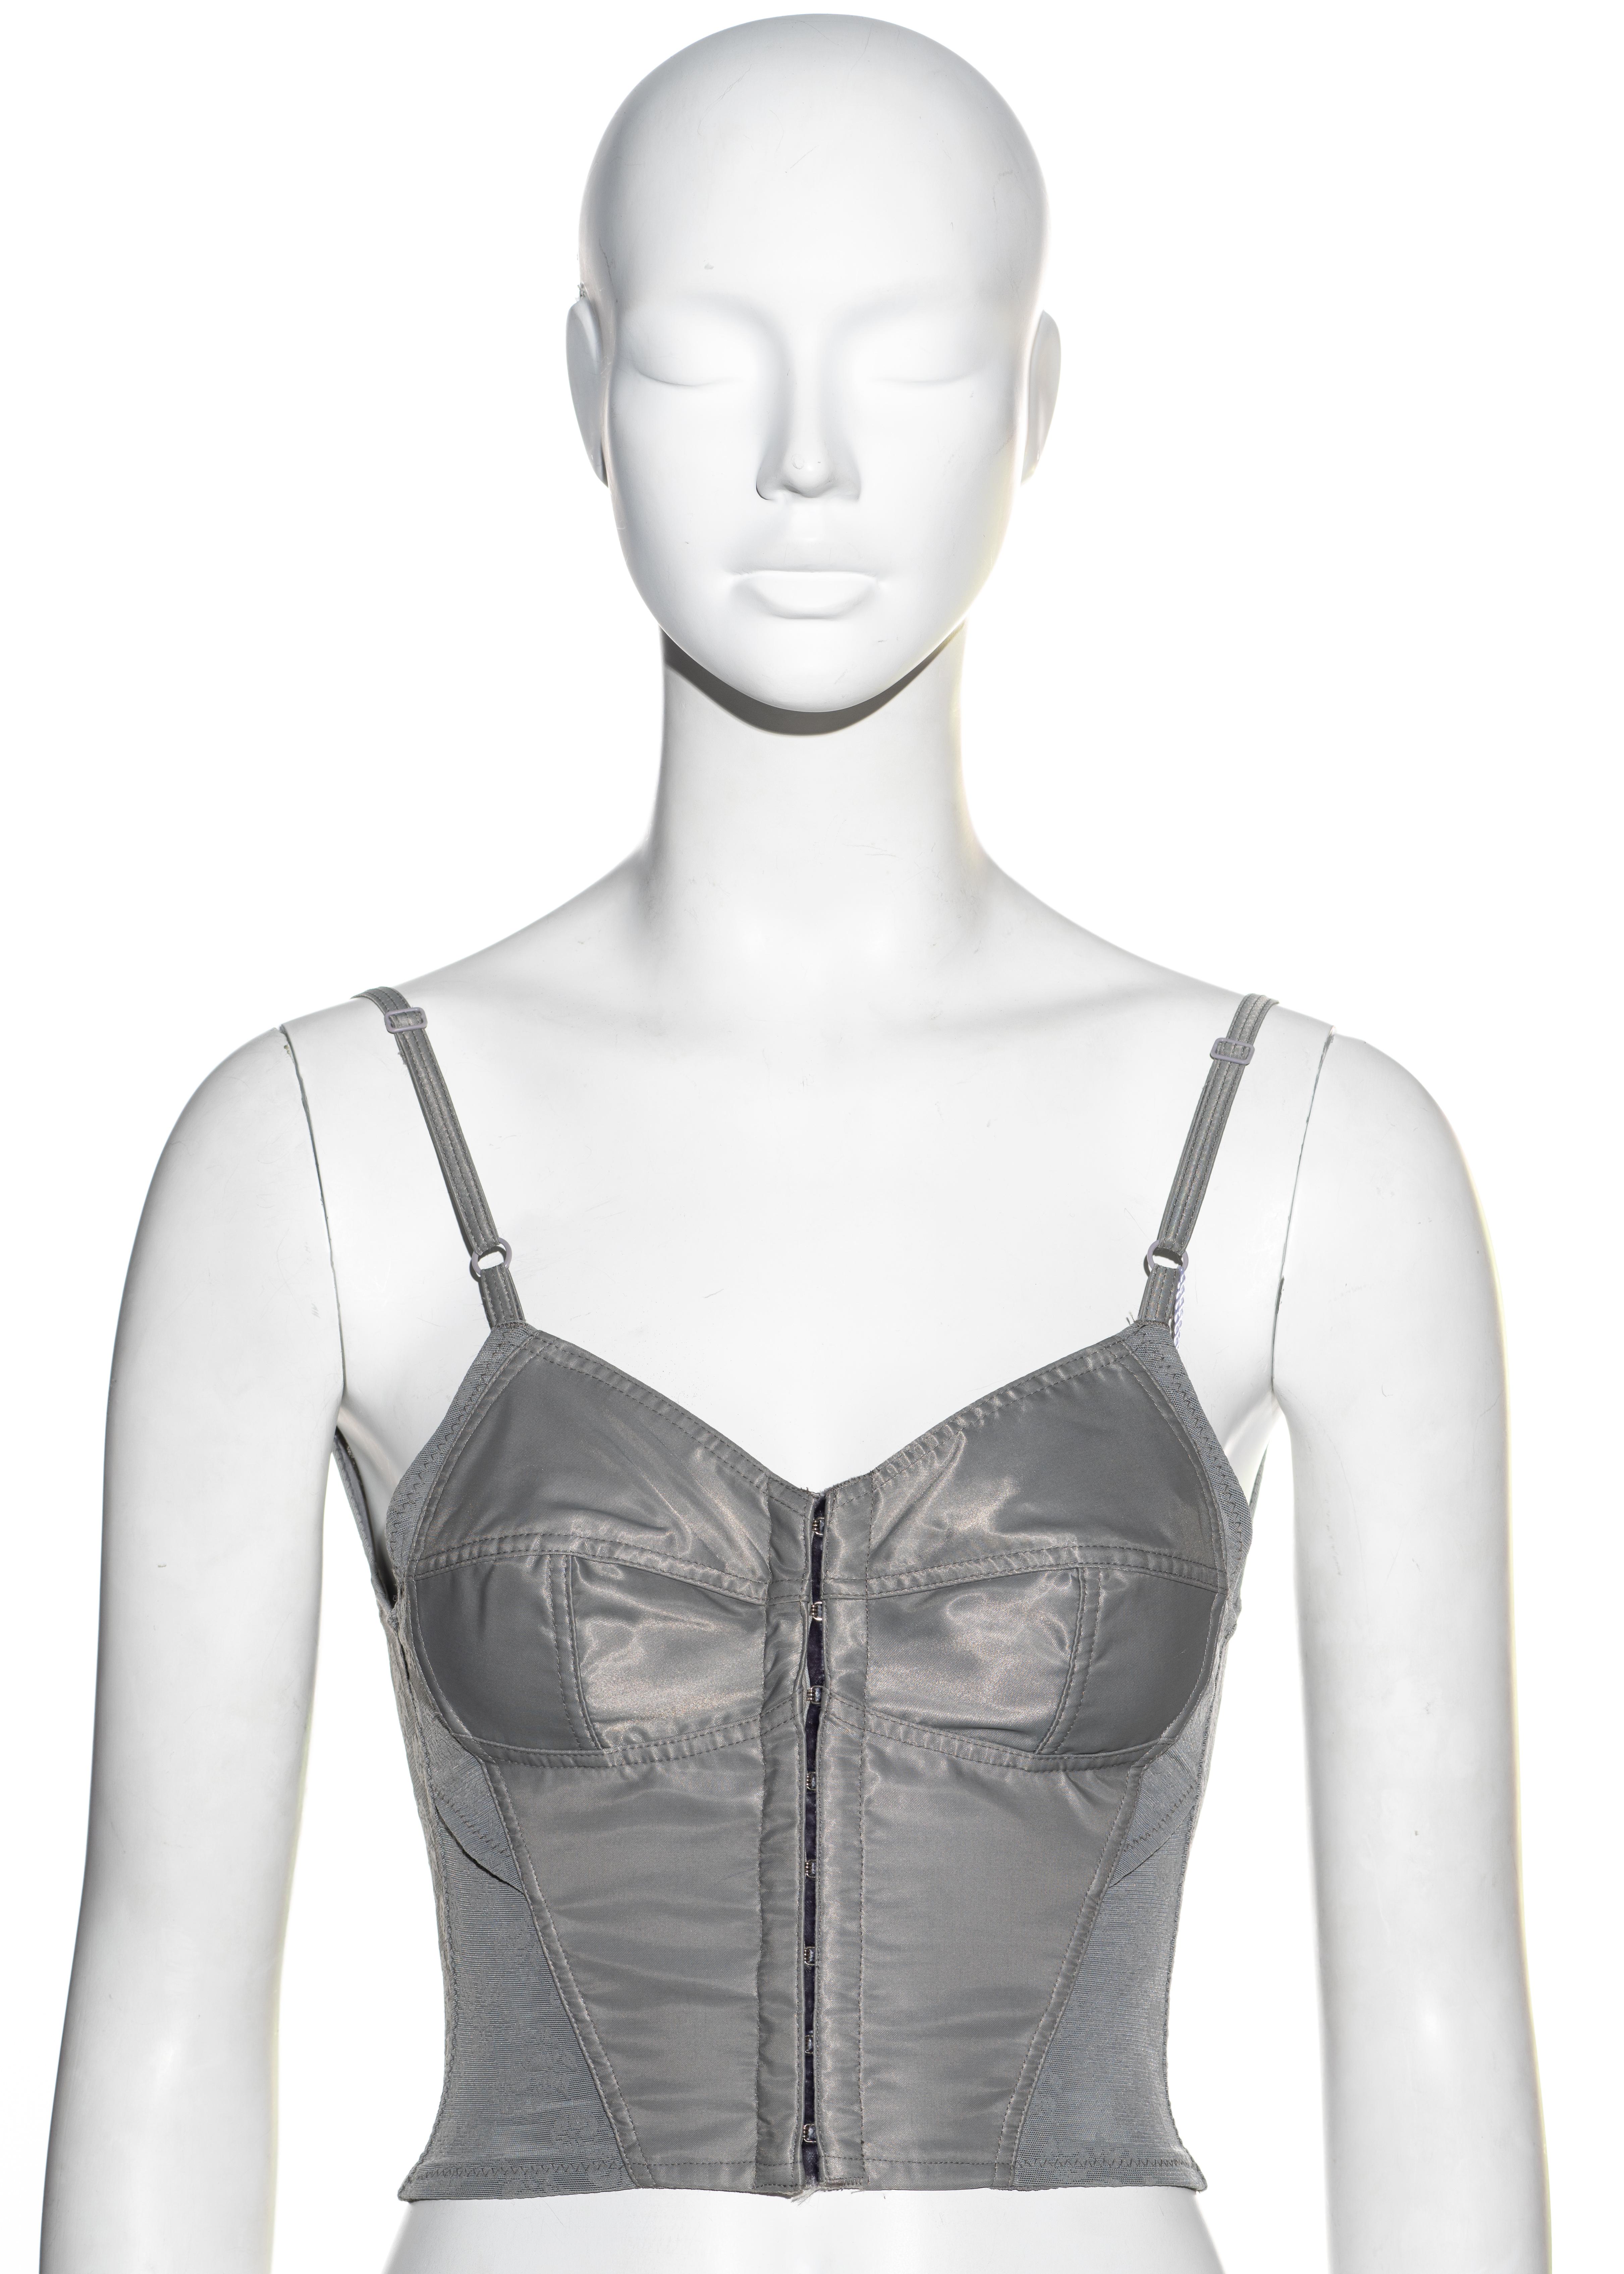 ▪ Dolce & Gabbana silver grey satin and lycra corset top
▪ Metal hook fastenings 
▪ Adjustable shoulder straps 
▪ Floral patterned lycra mesh 
▪ Low back
▪ Tight fit designed to bring the waist in 
▪ IT 40 - FR 36 - UK 8 - US 4
▪ Fall-Winter 1992